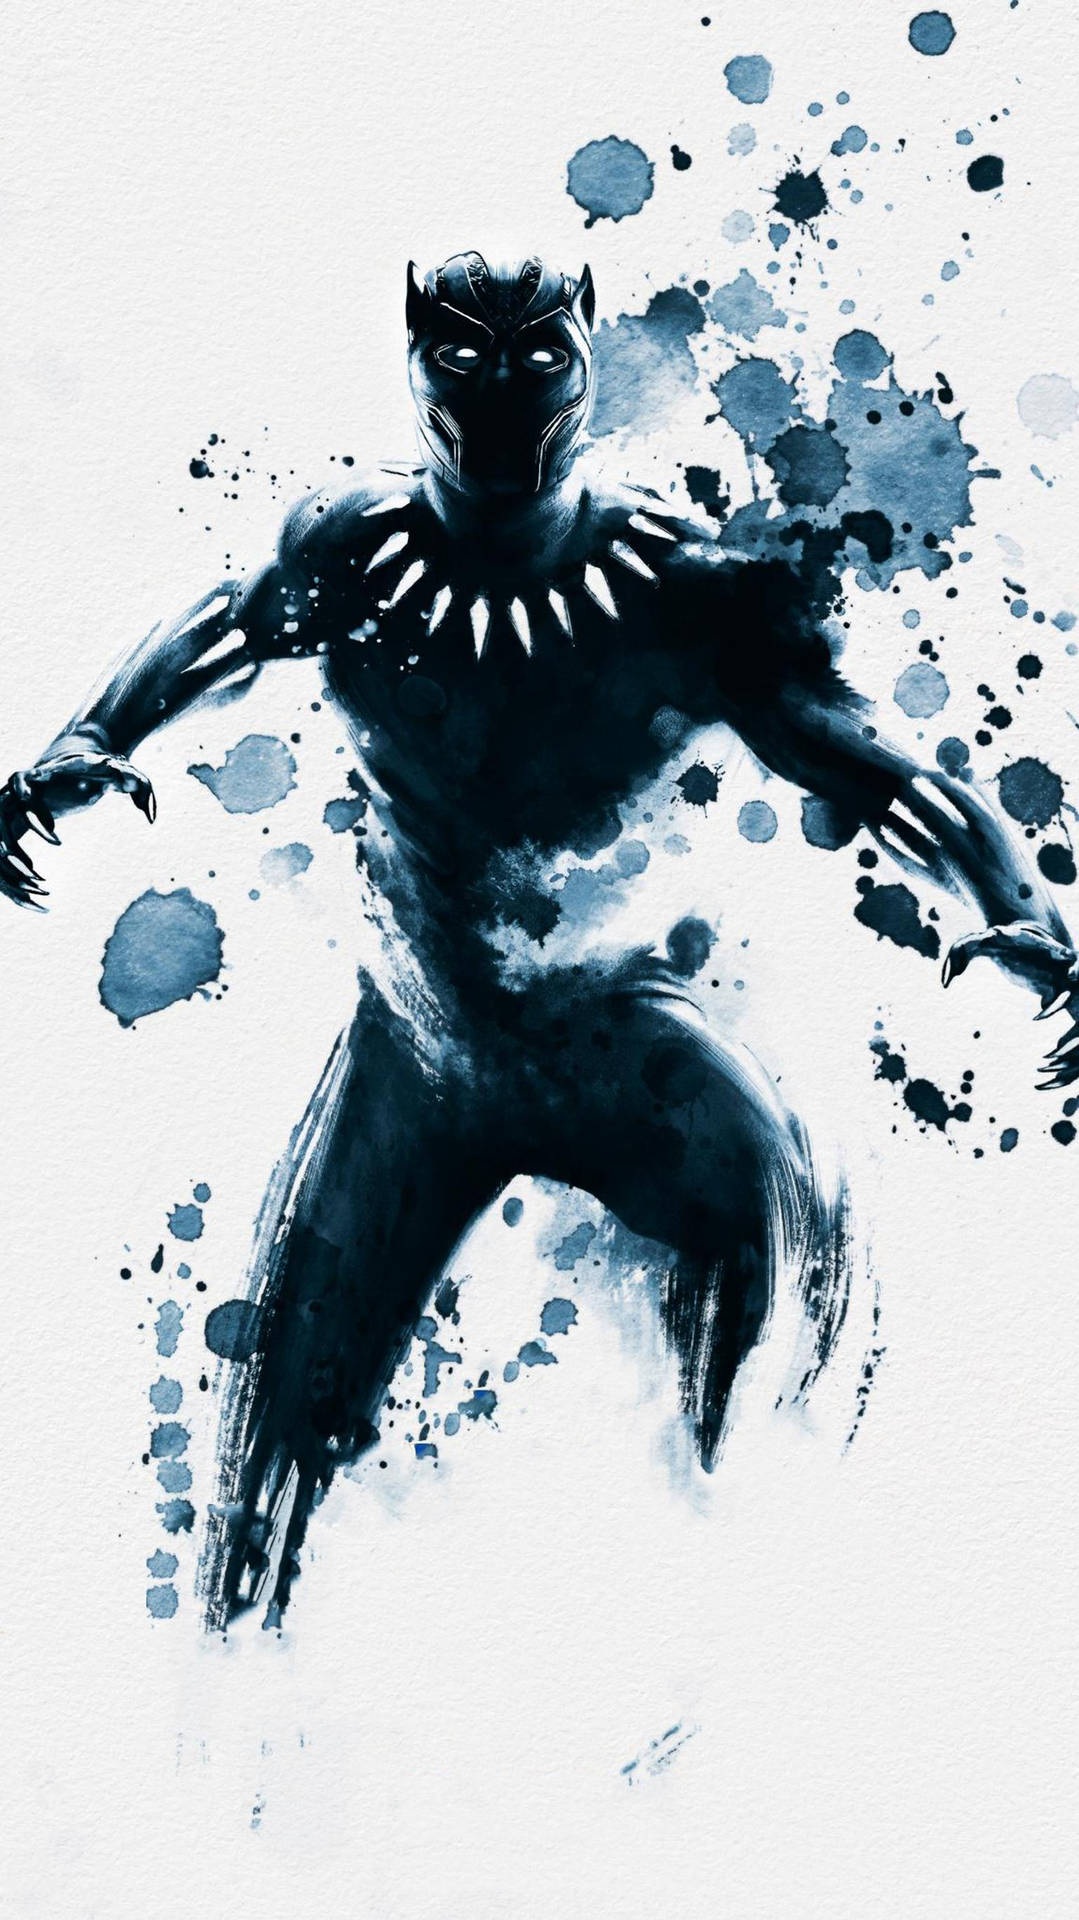 Get Ready For Action with Black Panther Wallpaper